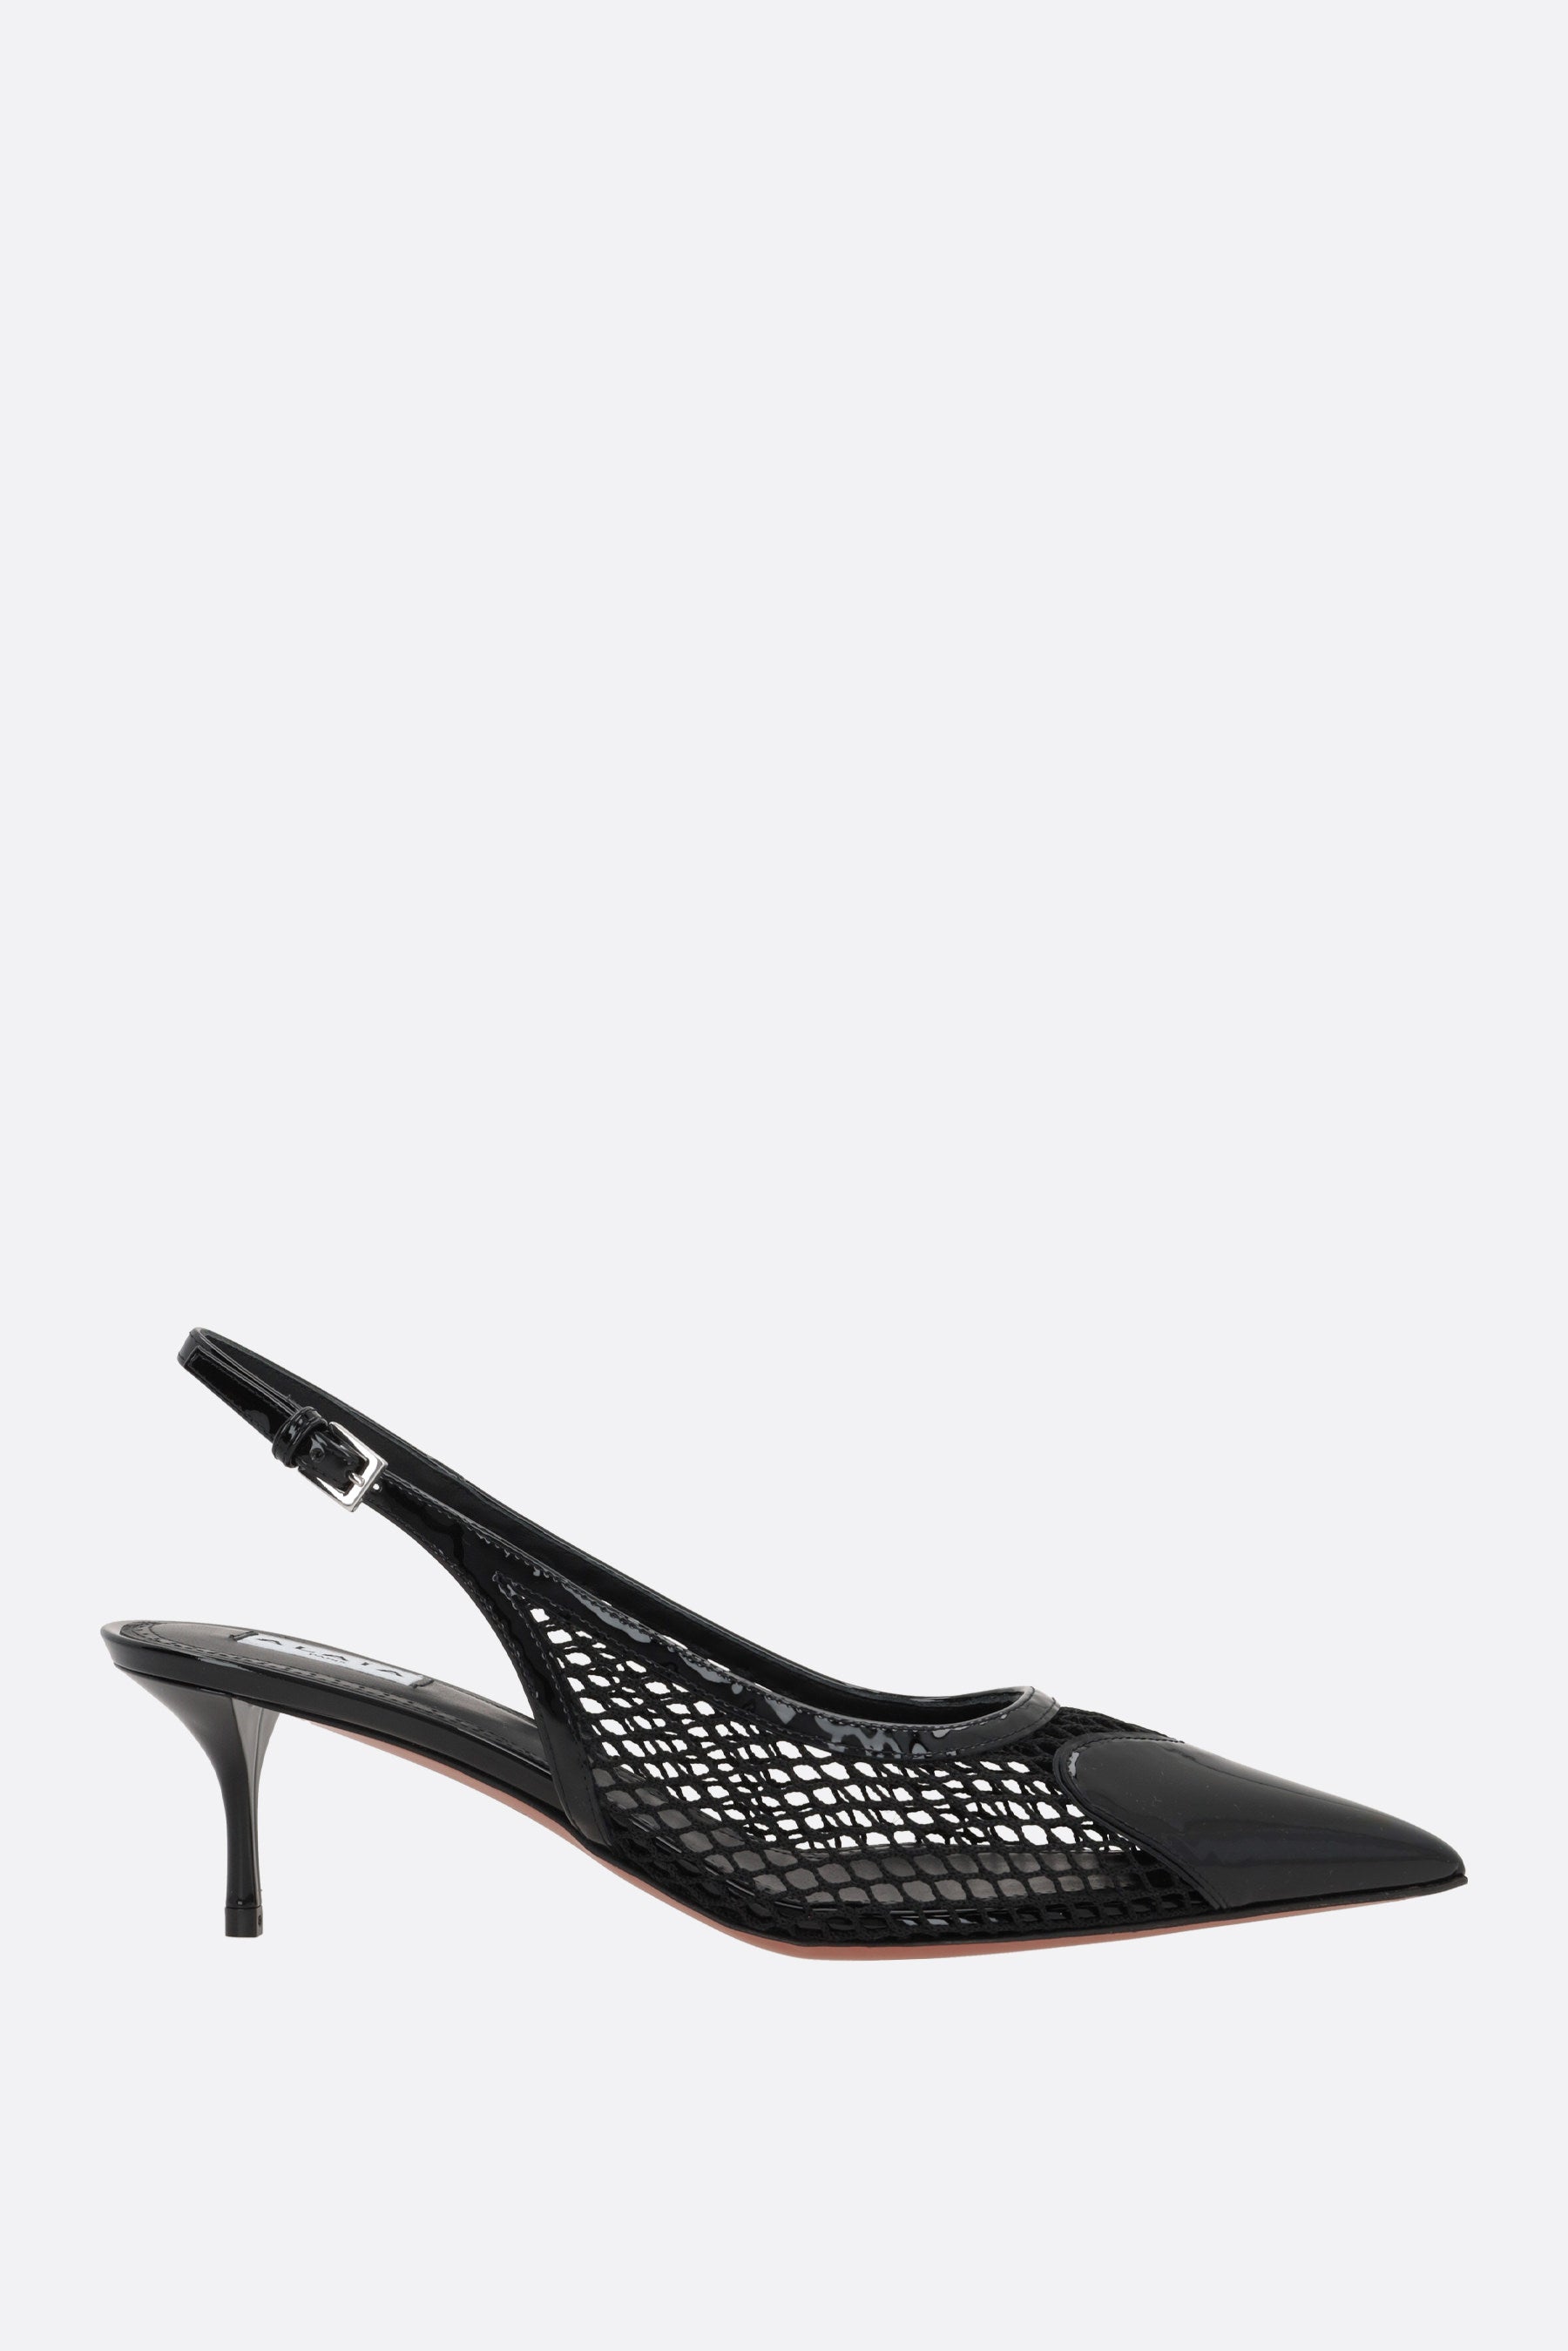 Le Coeur mesh and patent leather slingbacks